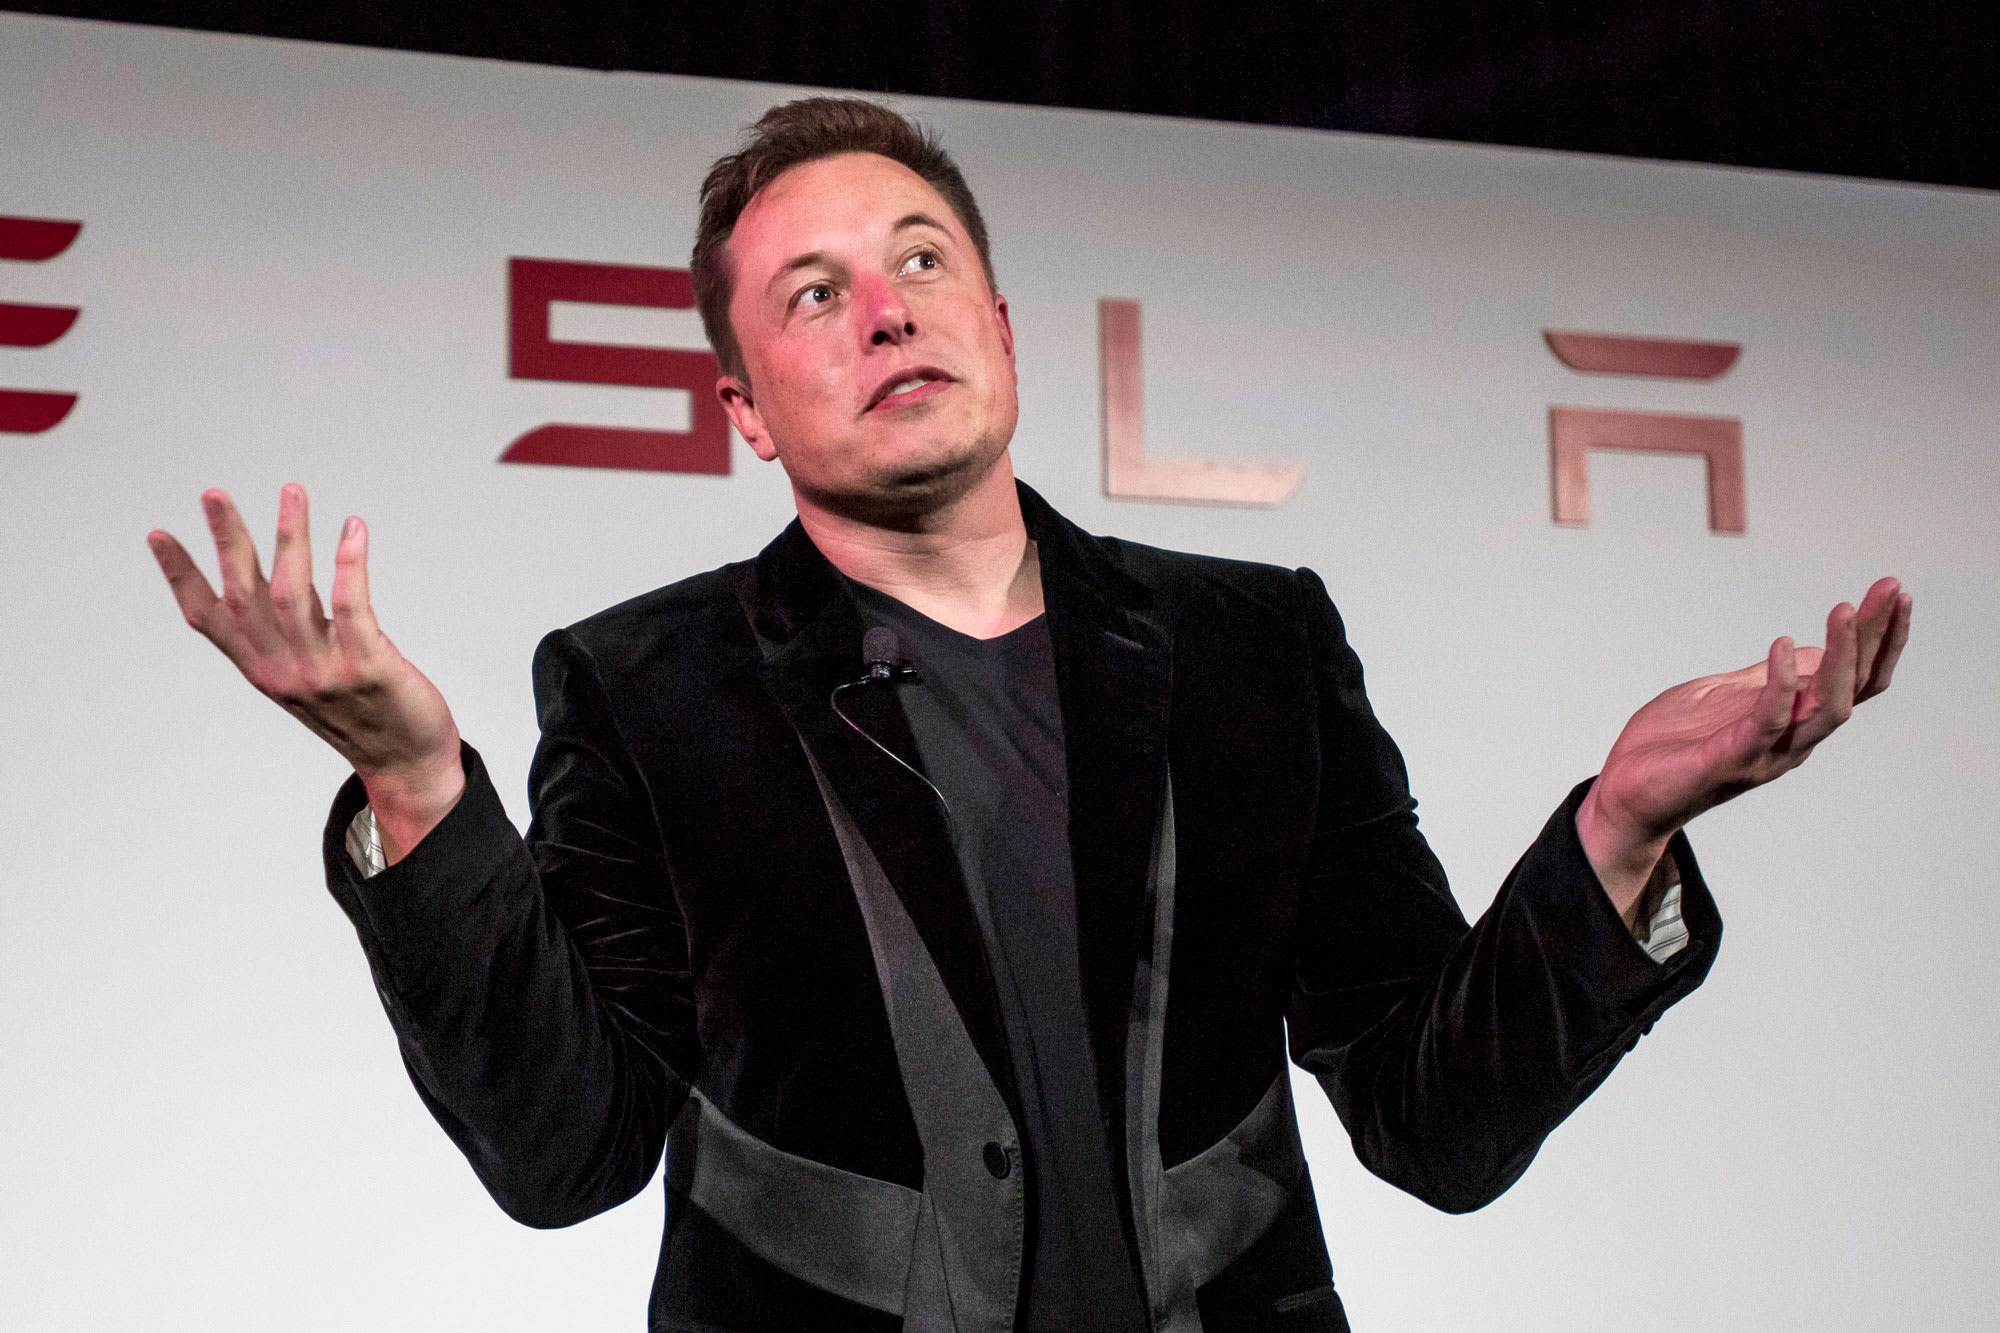 Tesla gives up most of monster one-day pop in wild speculative trading